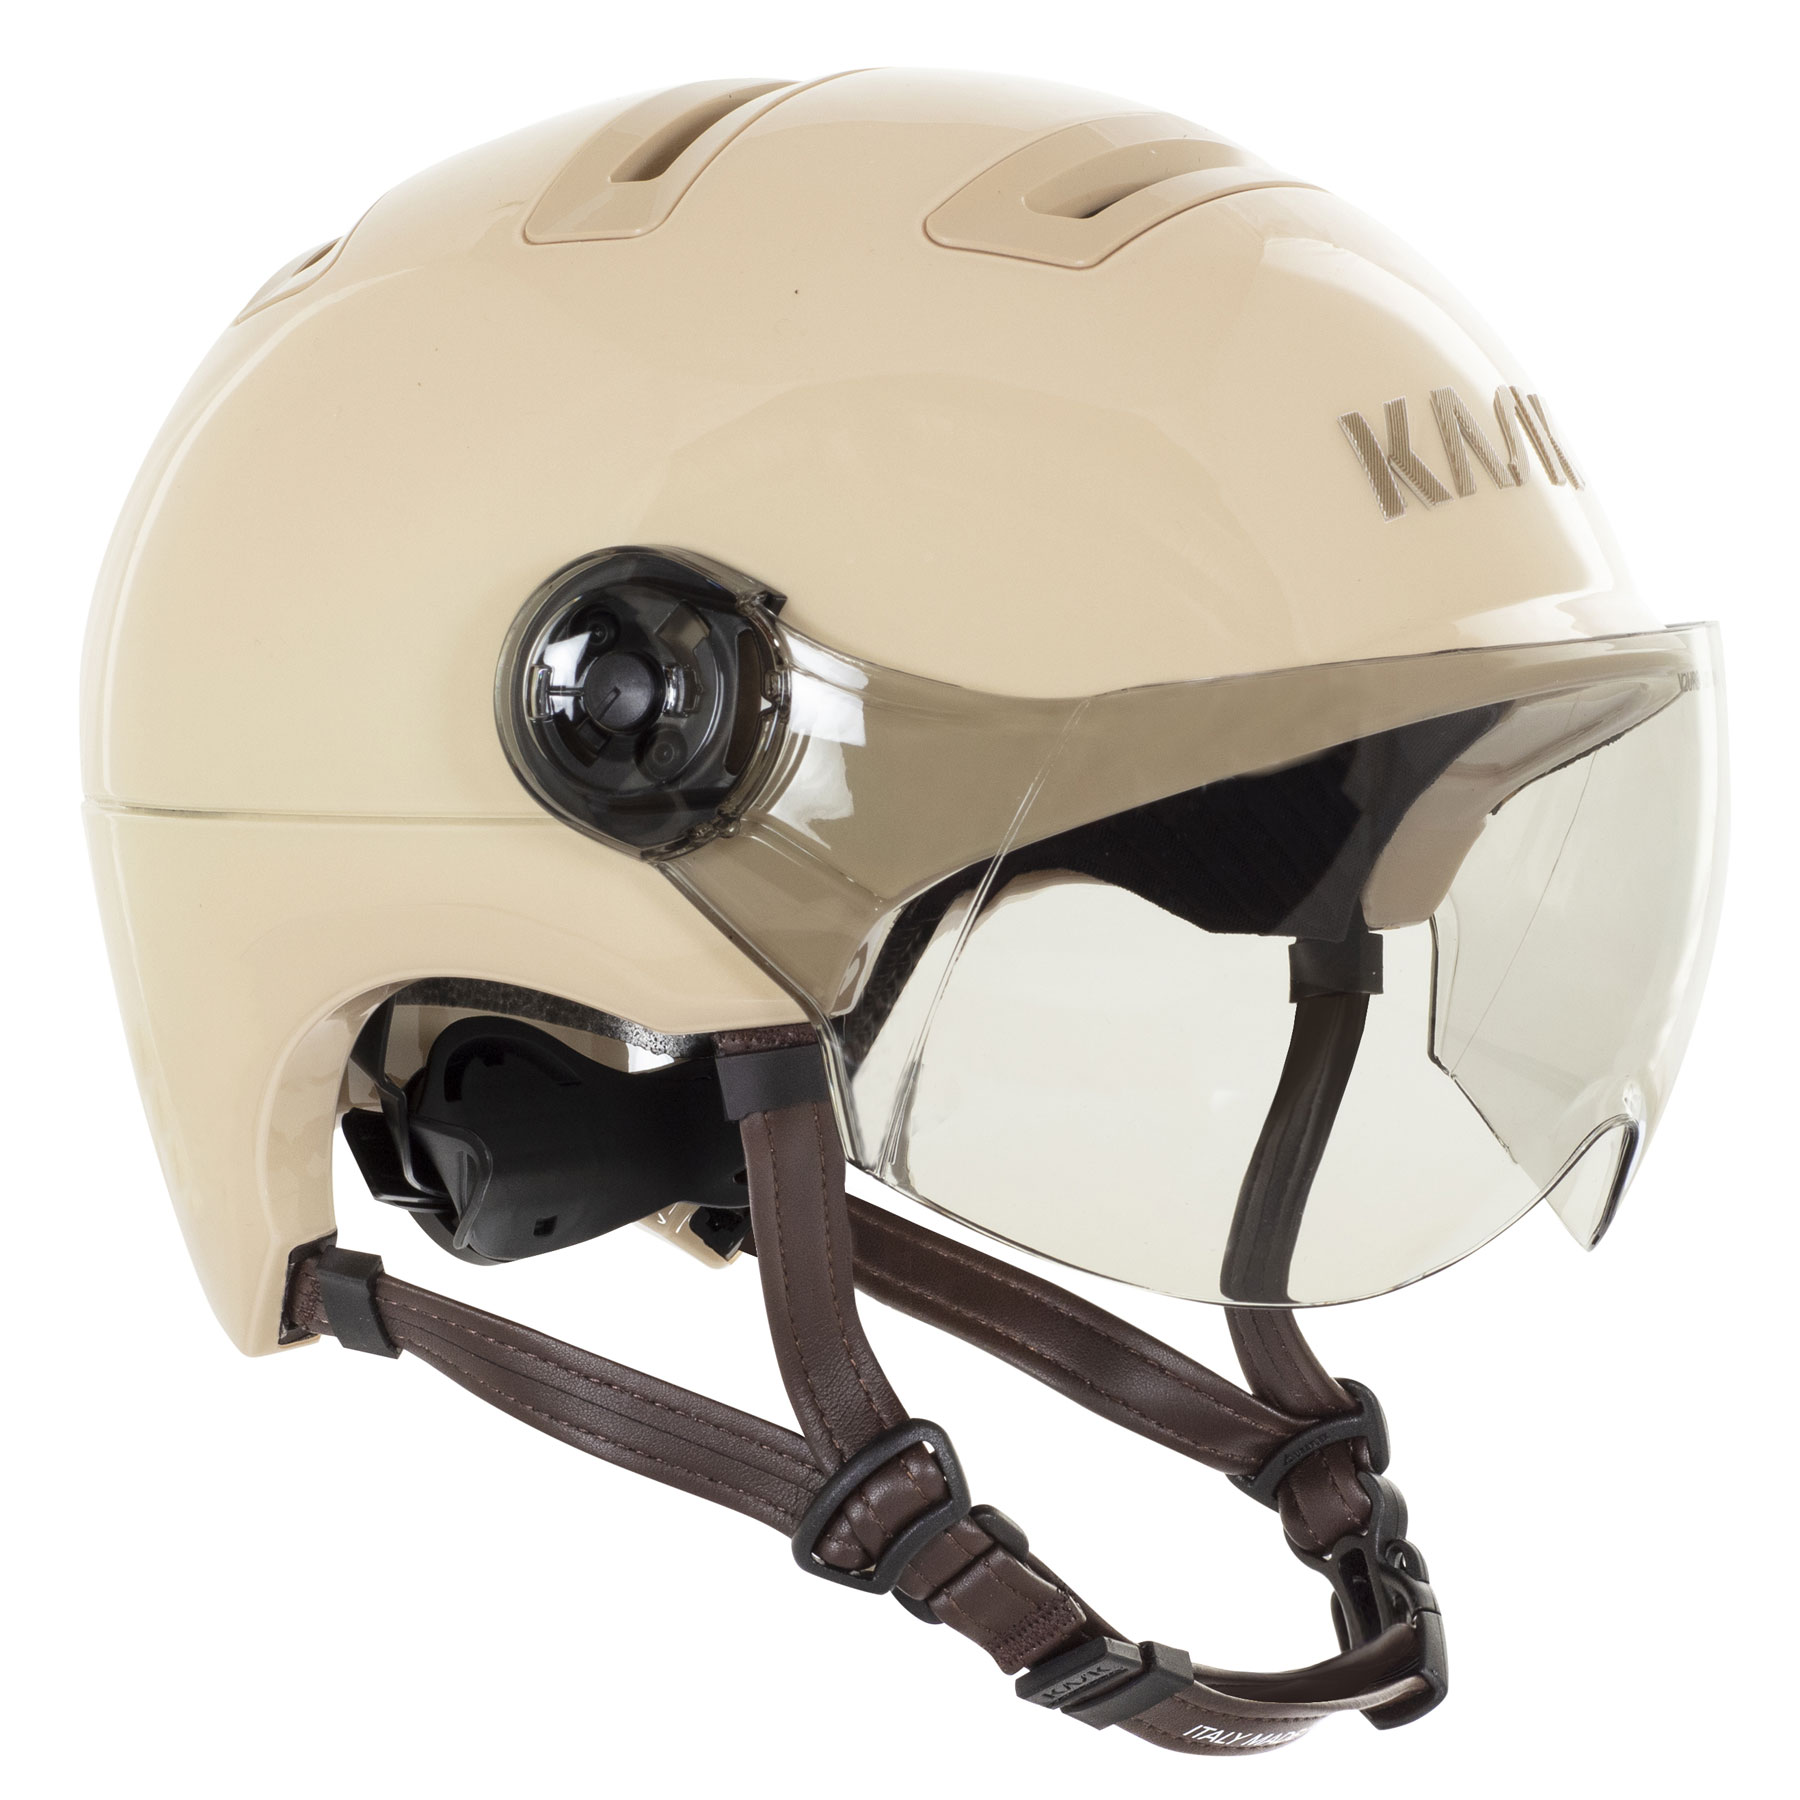 Picture of KASK Urban R WG11 Helmet - Champagne